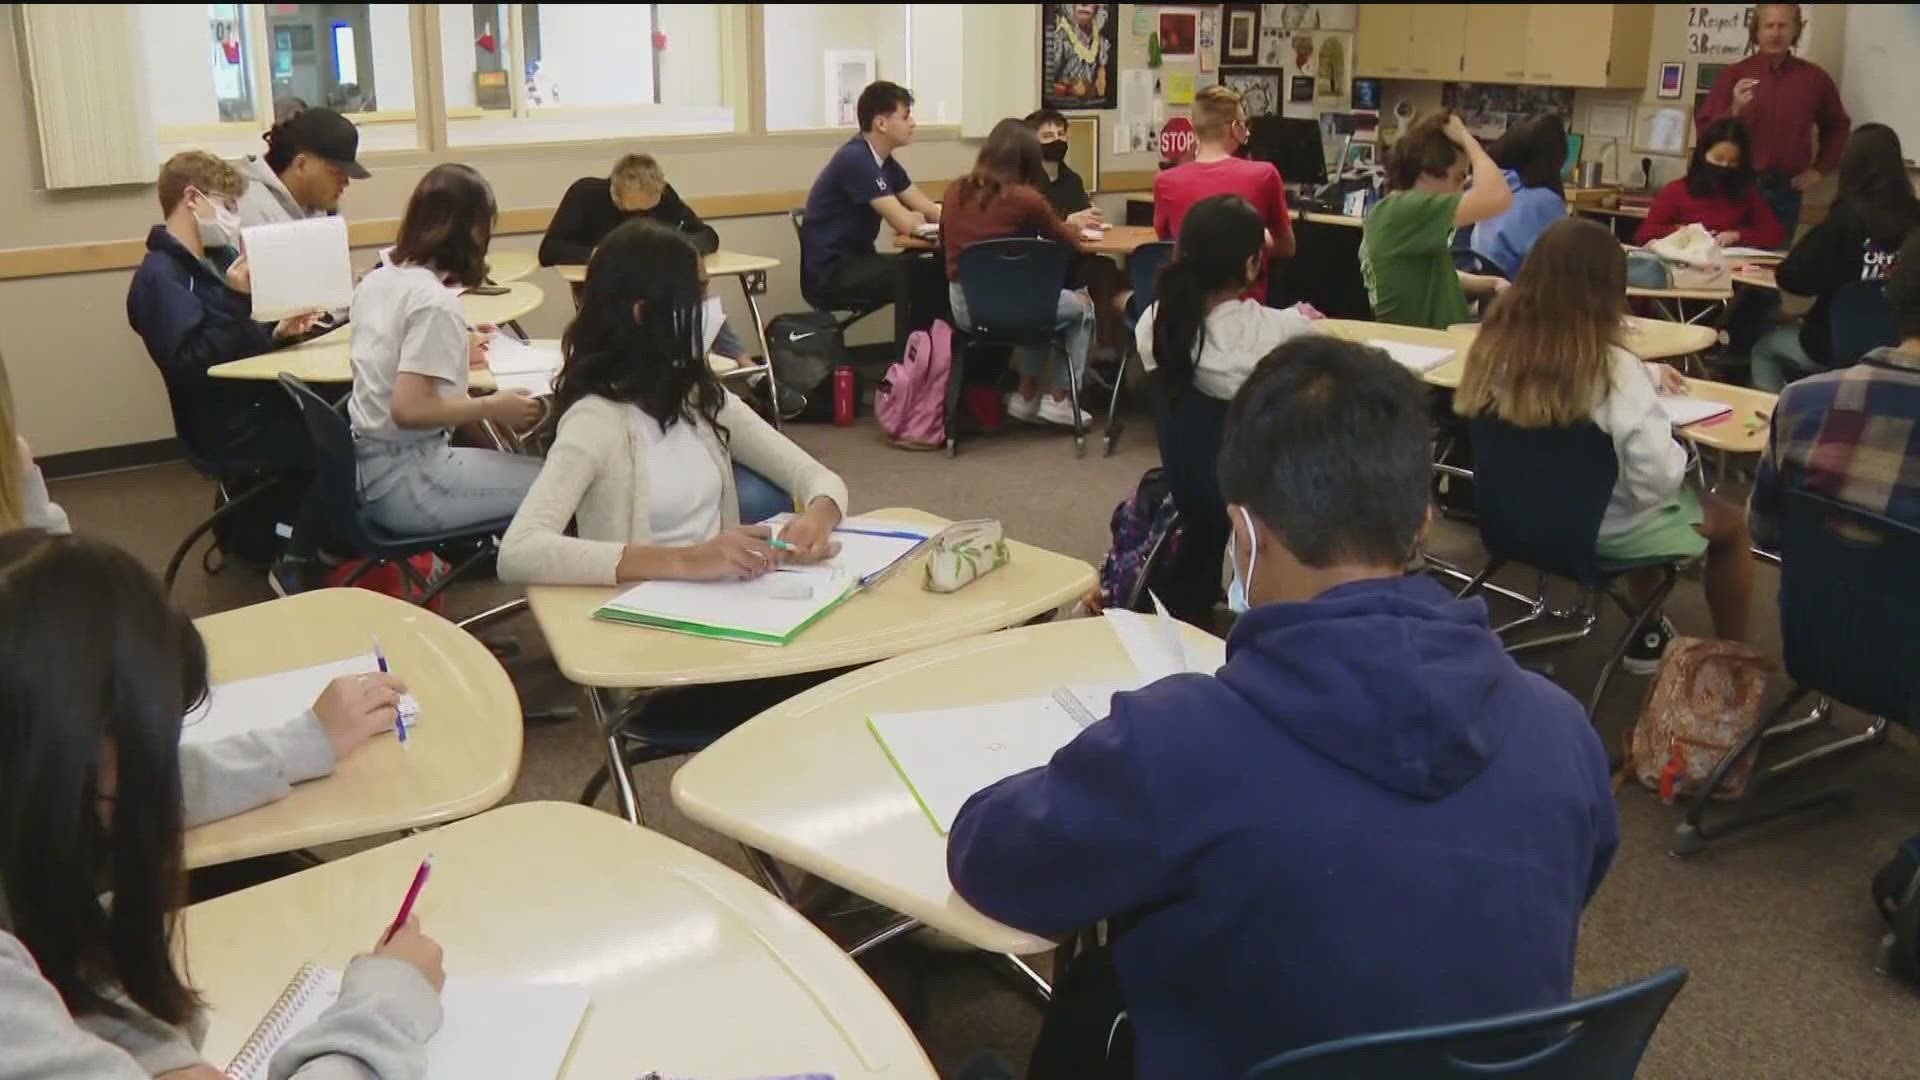 Starting July 18, the requirement goes into effect at San Diego Unified schools and offices.